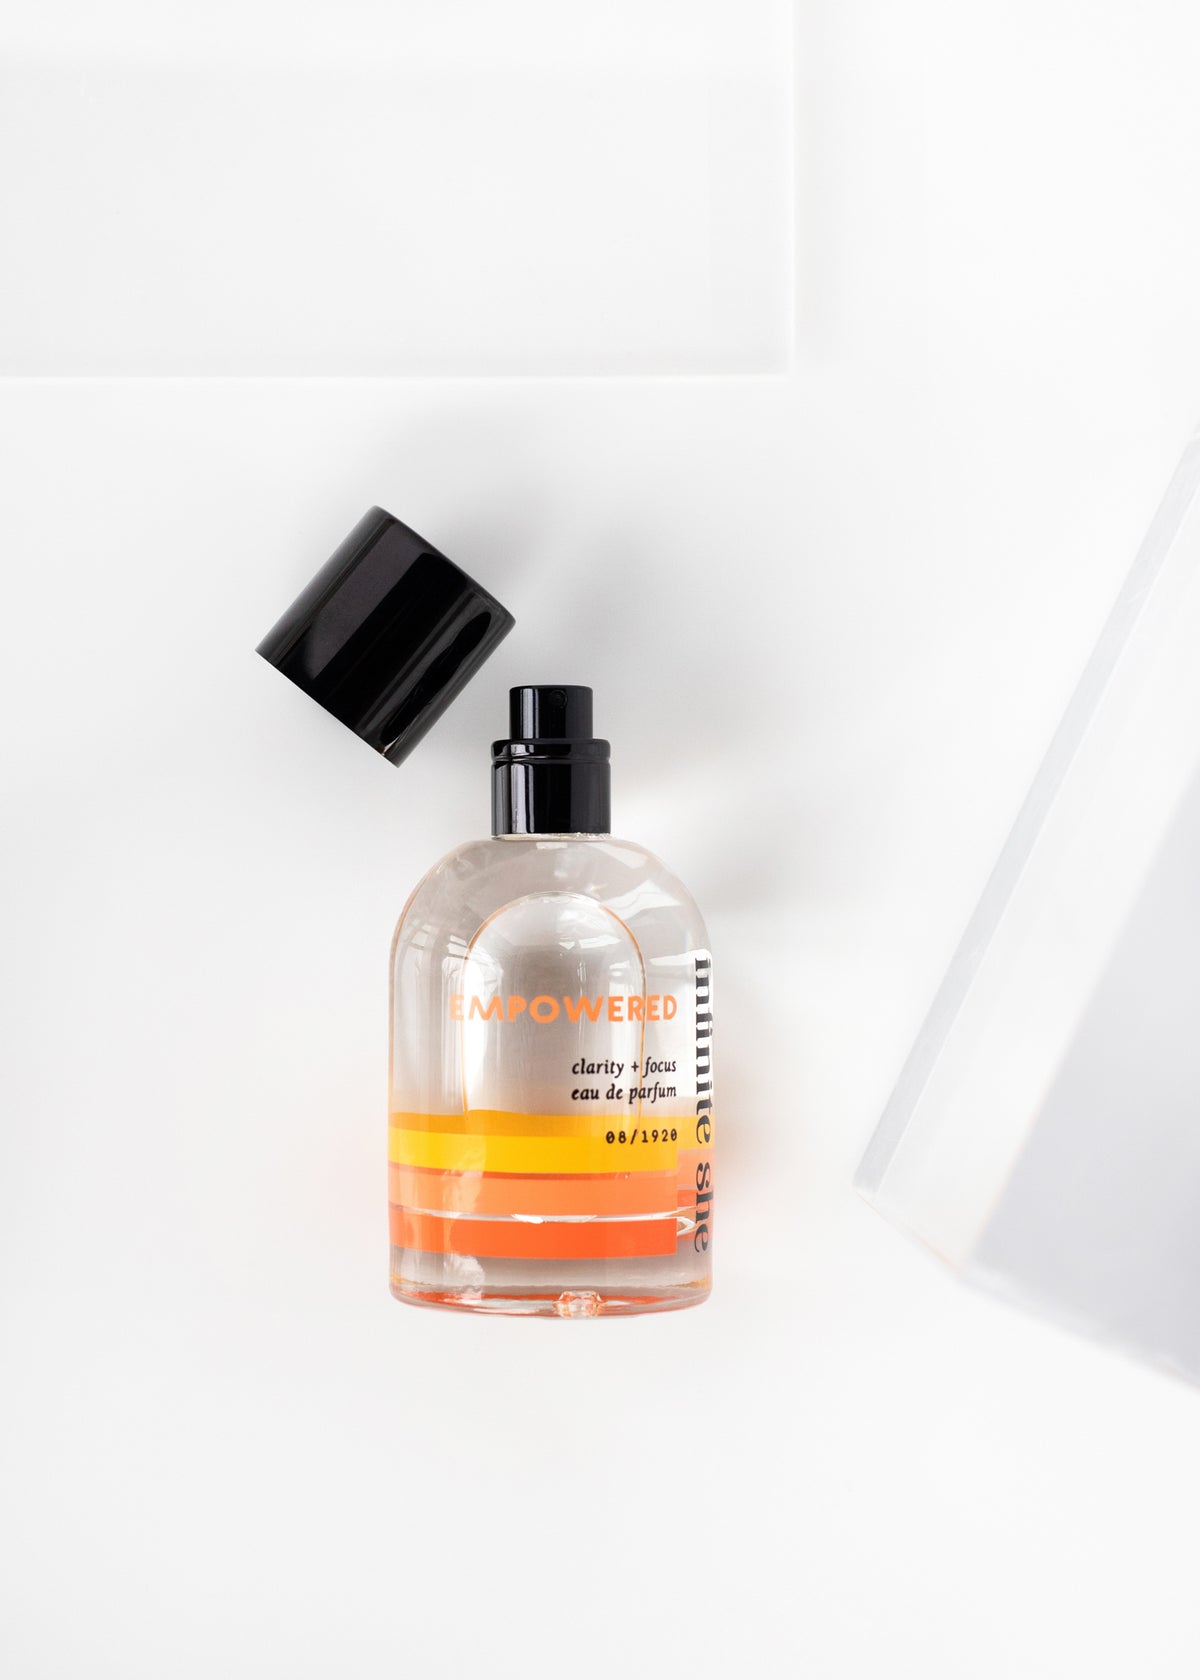 Transparent spray bottle labeled "Infinite She Empowered Eau de Parfum" with orange blossom liquid and a black cap, set on a white surface with a soft shadow from Margot Elena.